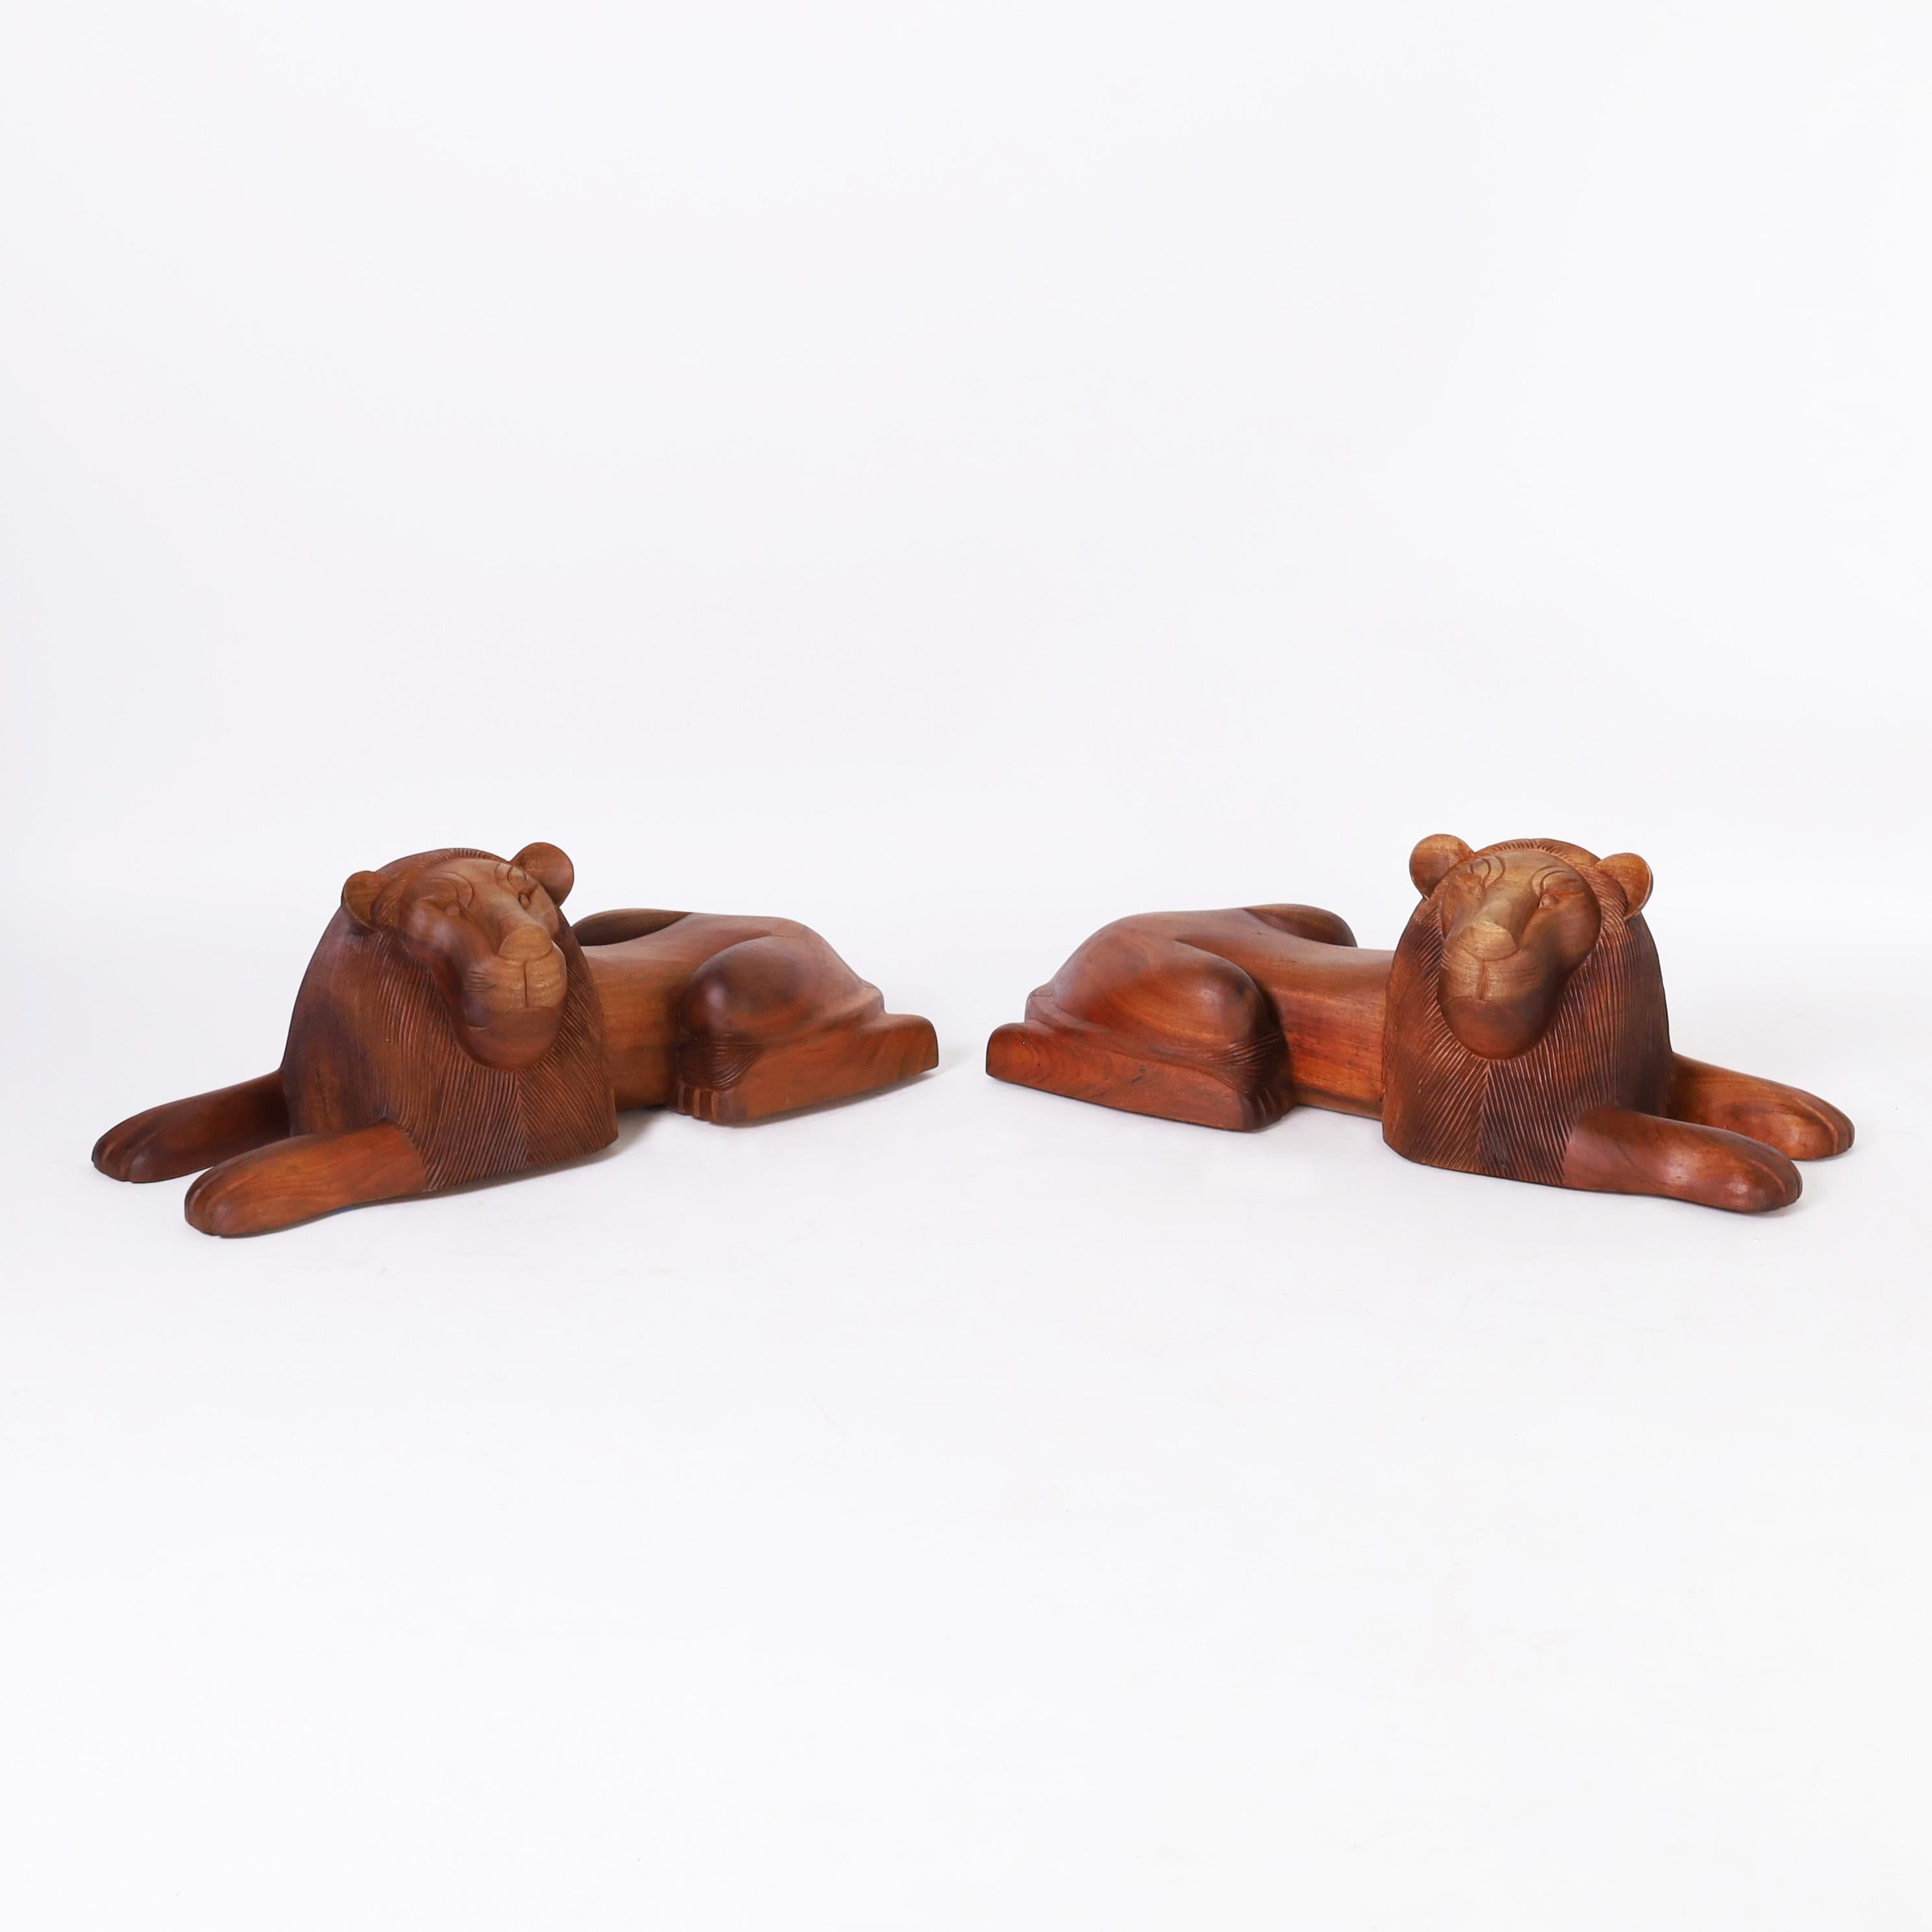 Rare and remarkable pair of mid century lions in repose hand carved, in a stylized modern form, from the Cammatillo tree or Kingwood grown in the Minas Gerais region of Brazil.